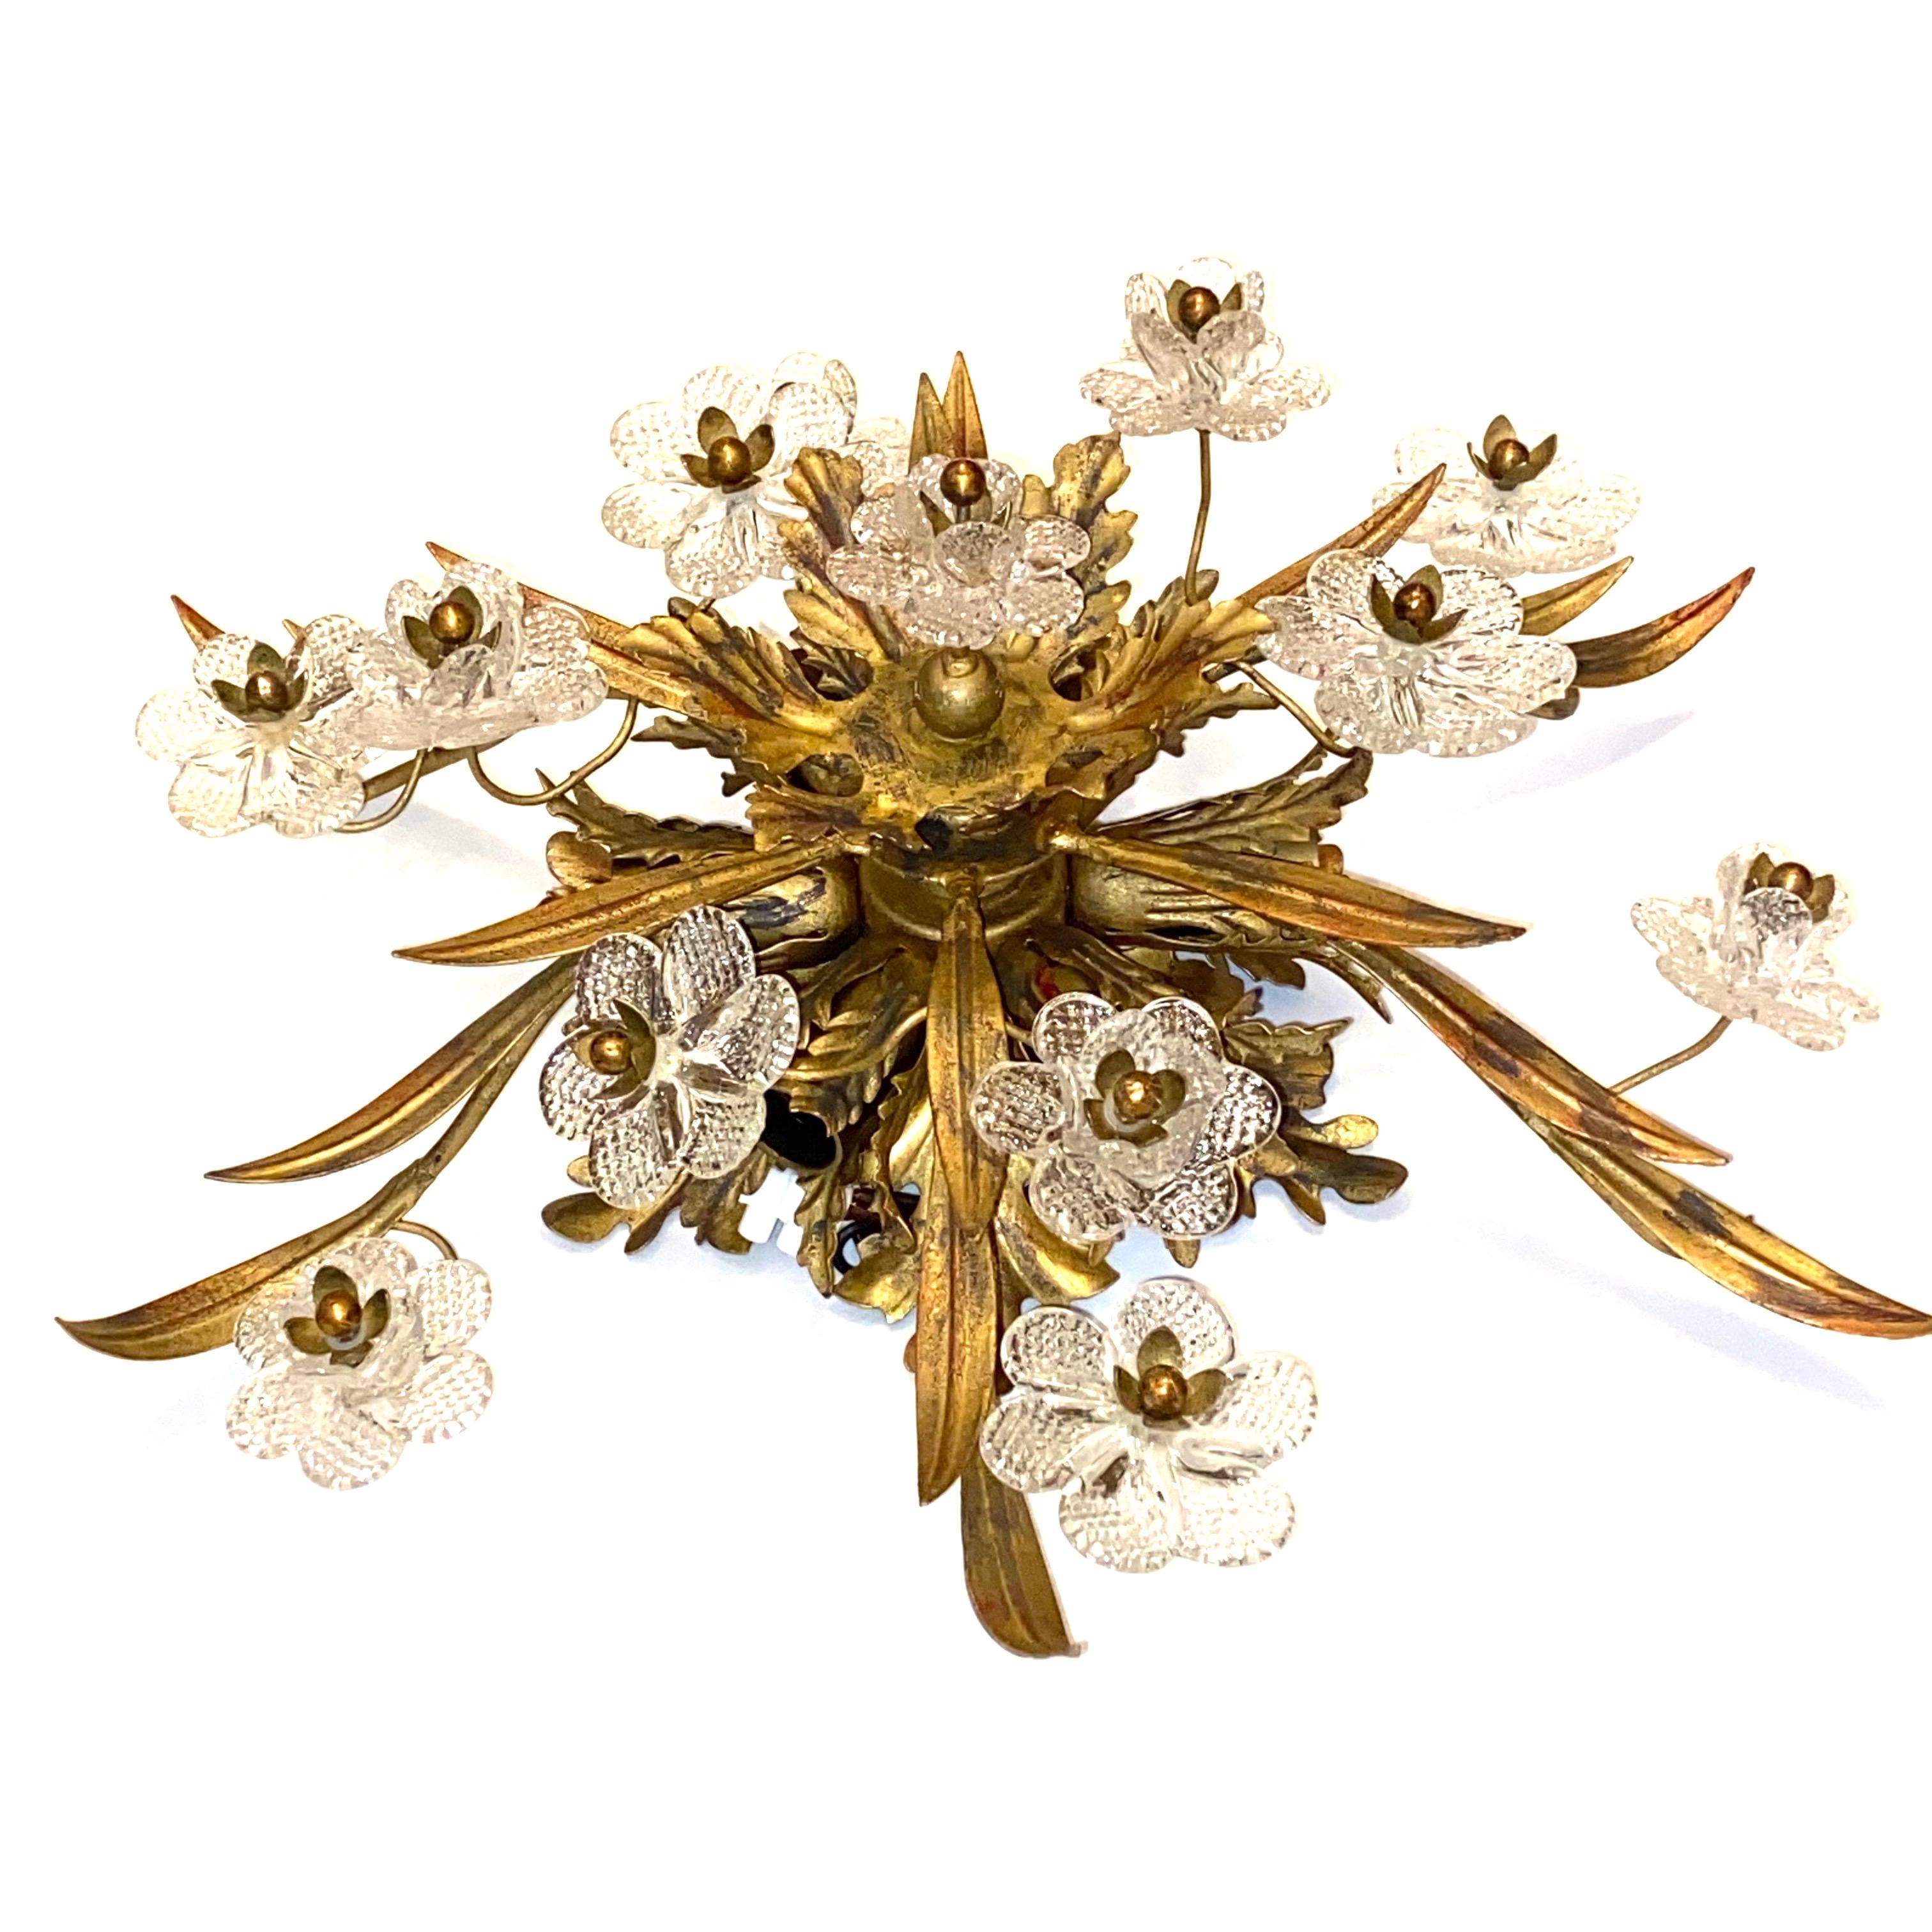 Mid-20th Century Gilded Leaf and Murano Glass Tole Hollywood Regency Flushmount Banci, Italy